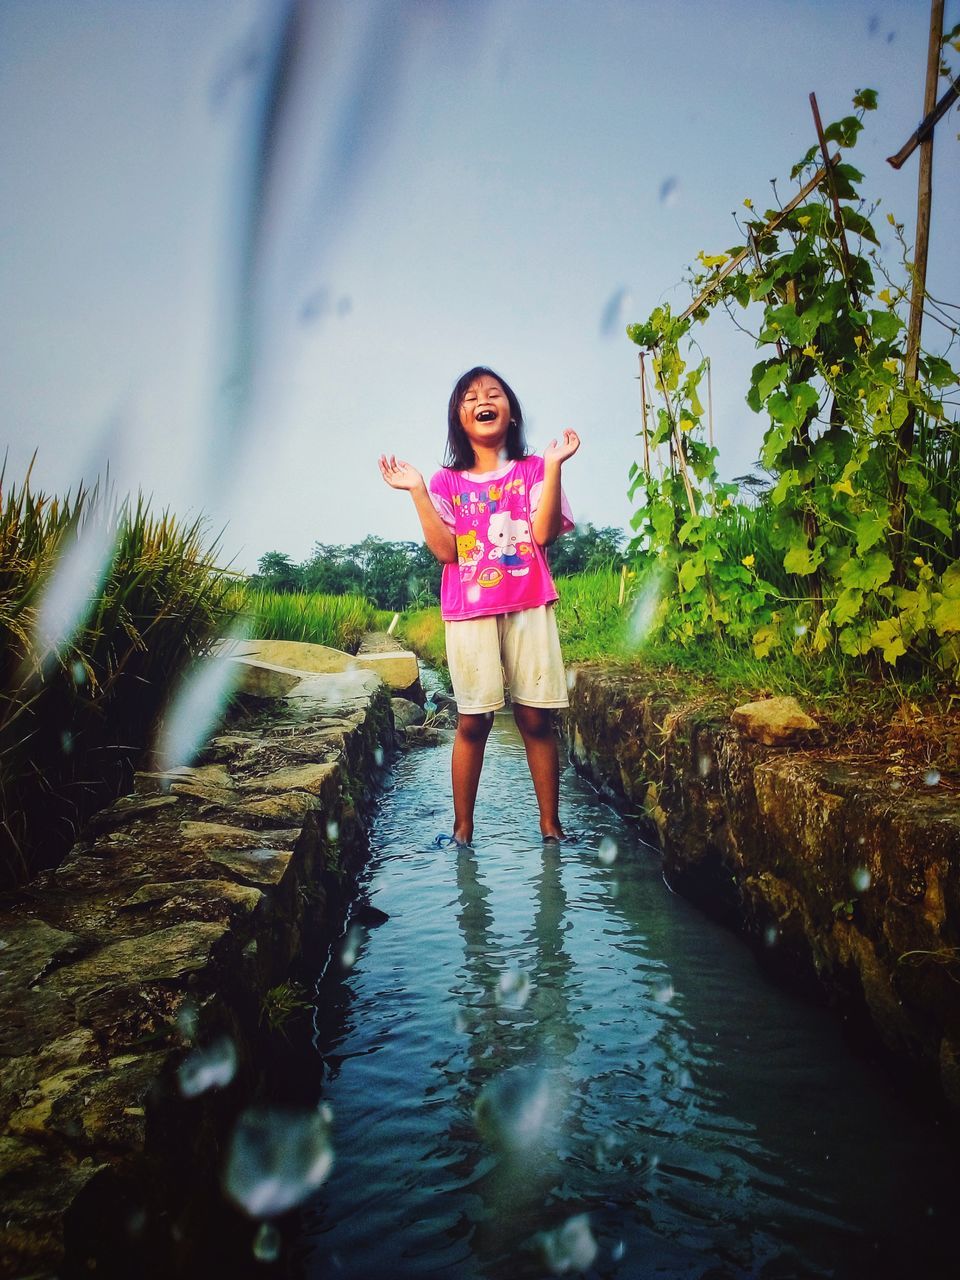 one person, water, nature, sunlight, full length, women, sky, reflection, front view, plant, childhood, child, standing, adult, female, emotion, portrait, flower, clothing, tree, happiness, smiling, leisure activity, outdoors, day, fashion, lifestyles, holiday, casual clothing, young adult, beauty in nature, summer, vacation, trip, looking at camera, pink, land